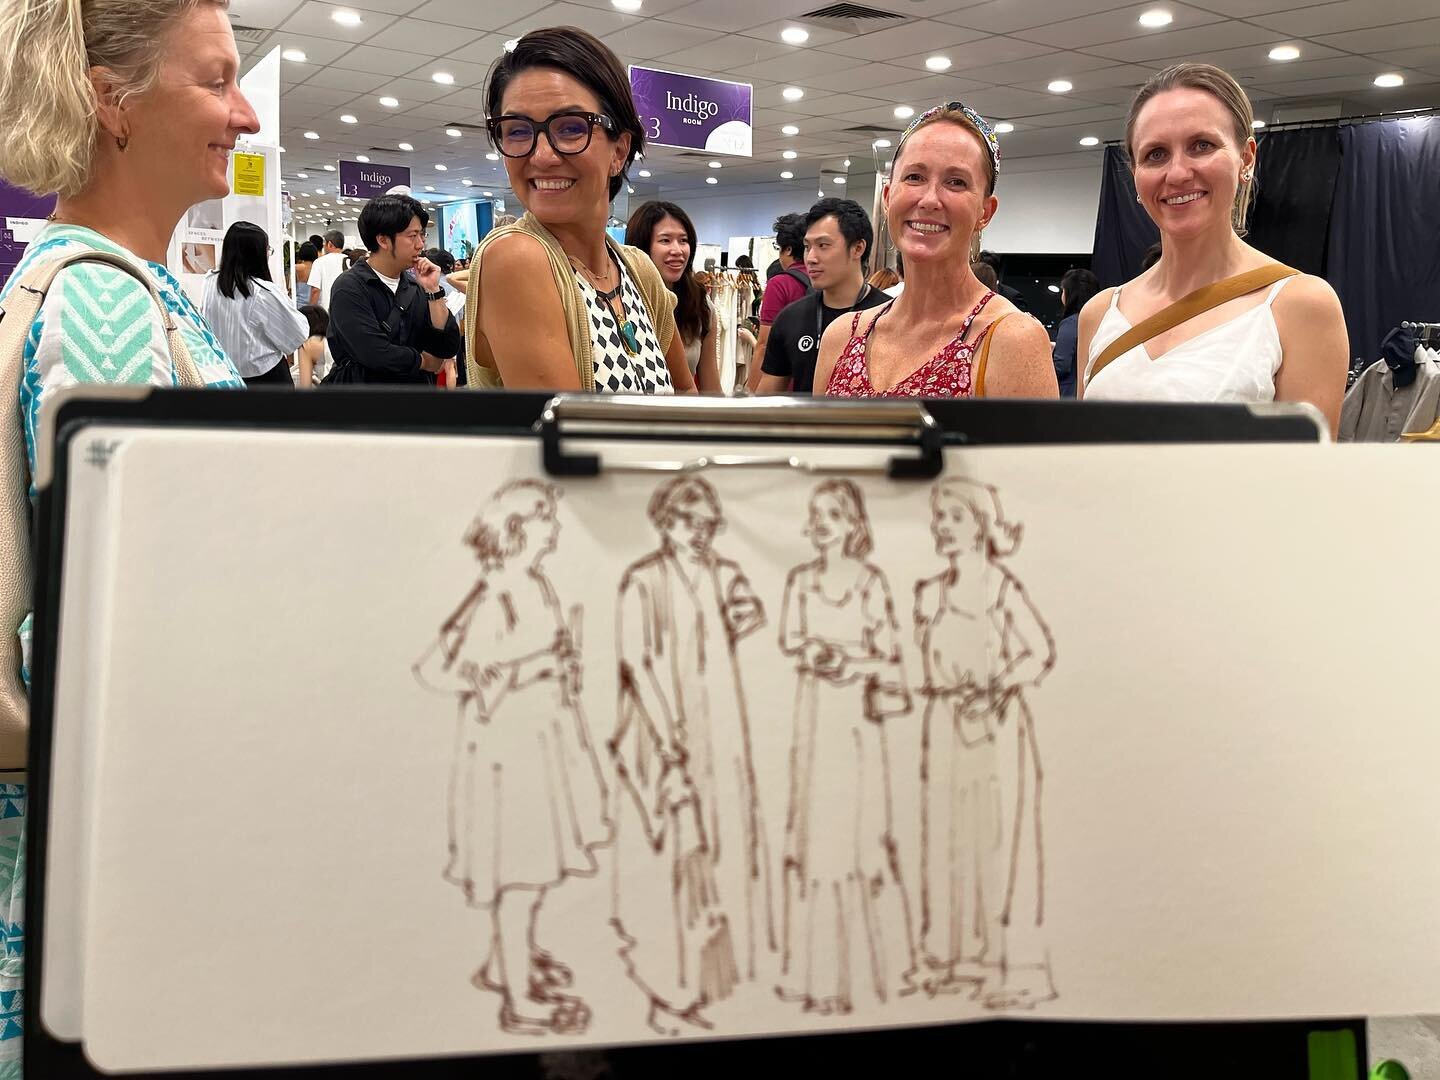 Sketching people at the @boutiquefairssg in the F1 pit building last night was interesting and tough! Way too distracting to do that many moving people, so when these ladies stopped by, I asked them to pose for 2-3 minutes and I got to work. Really s